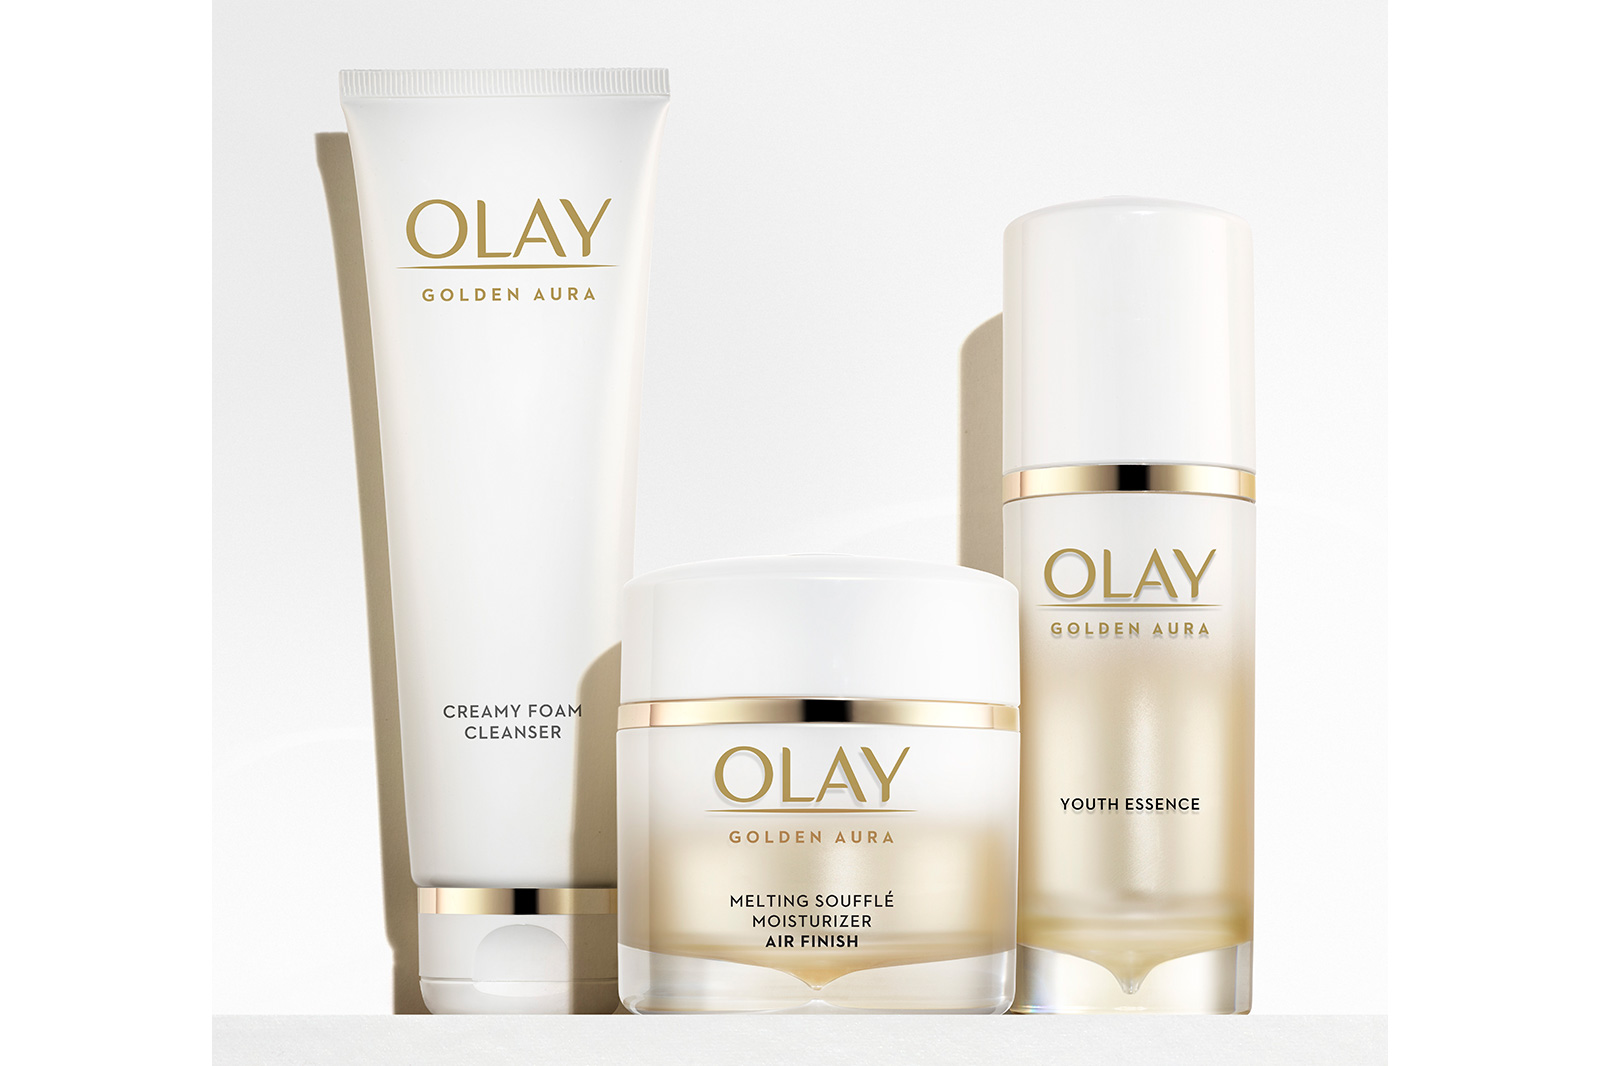 Olay product family after photo photo retouching